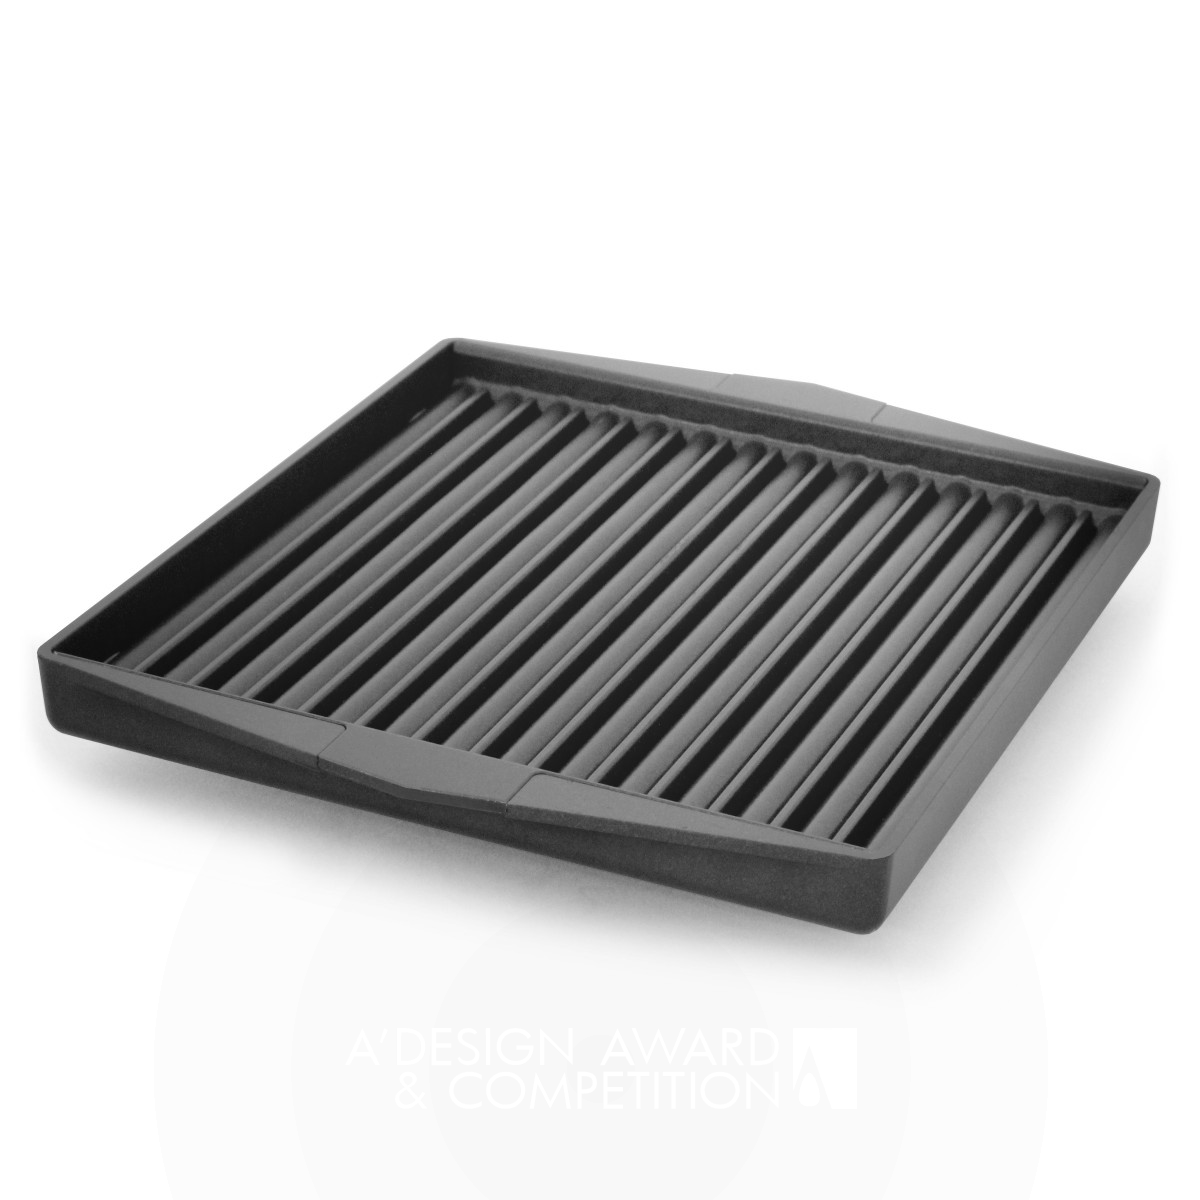 MiPan Grill Pan Cooking Surface by Michael O'Donnell